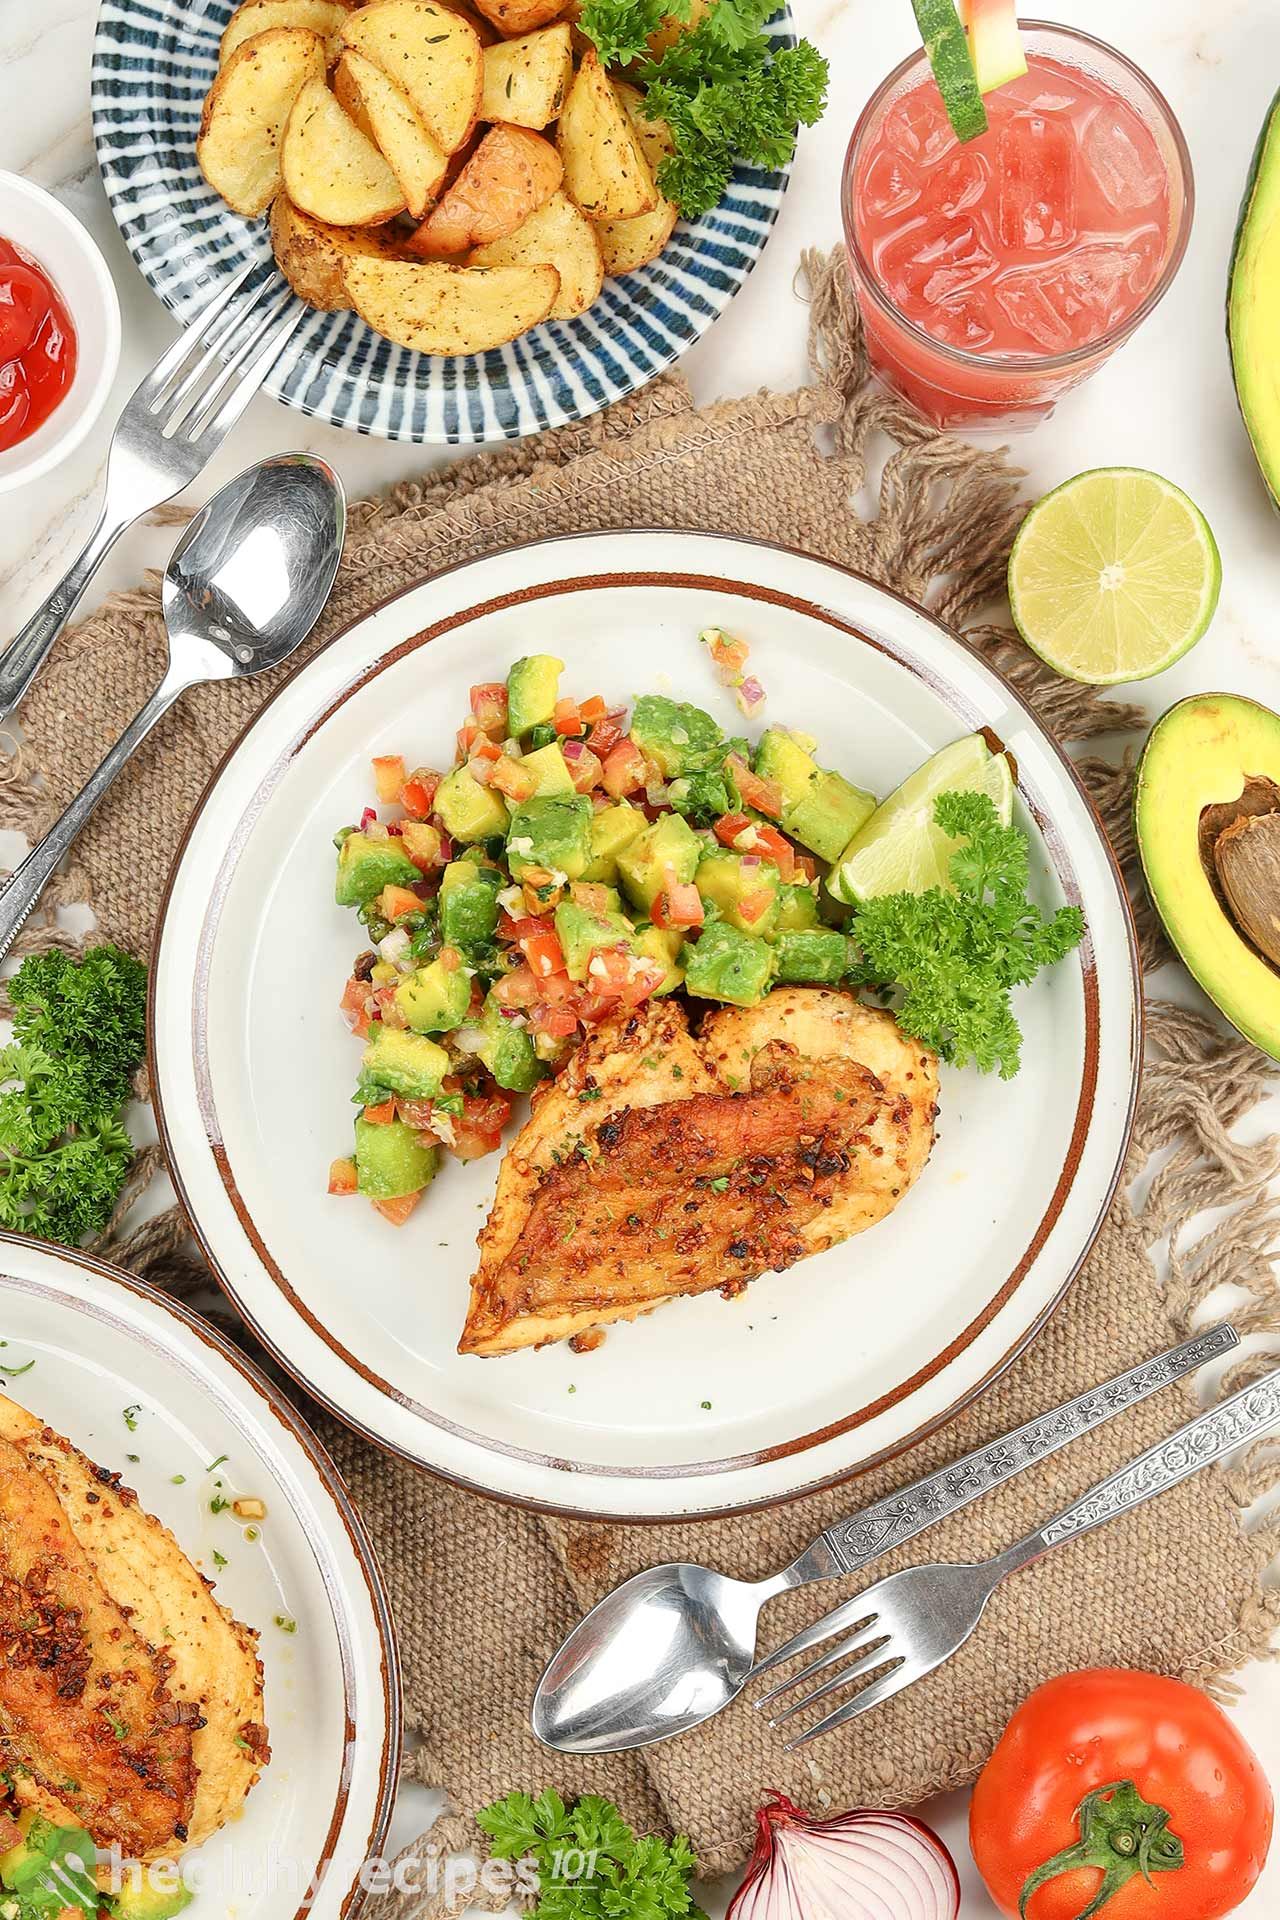 What to Serve With Chicken and Avocado Salsa